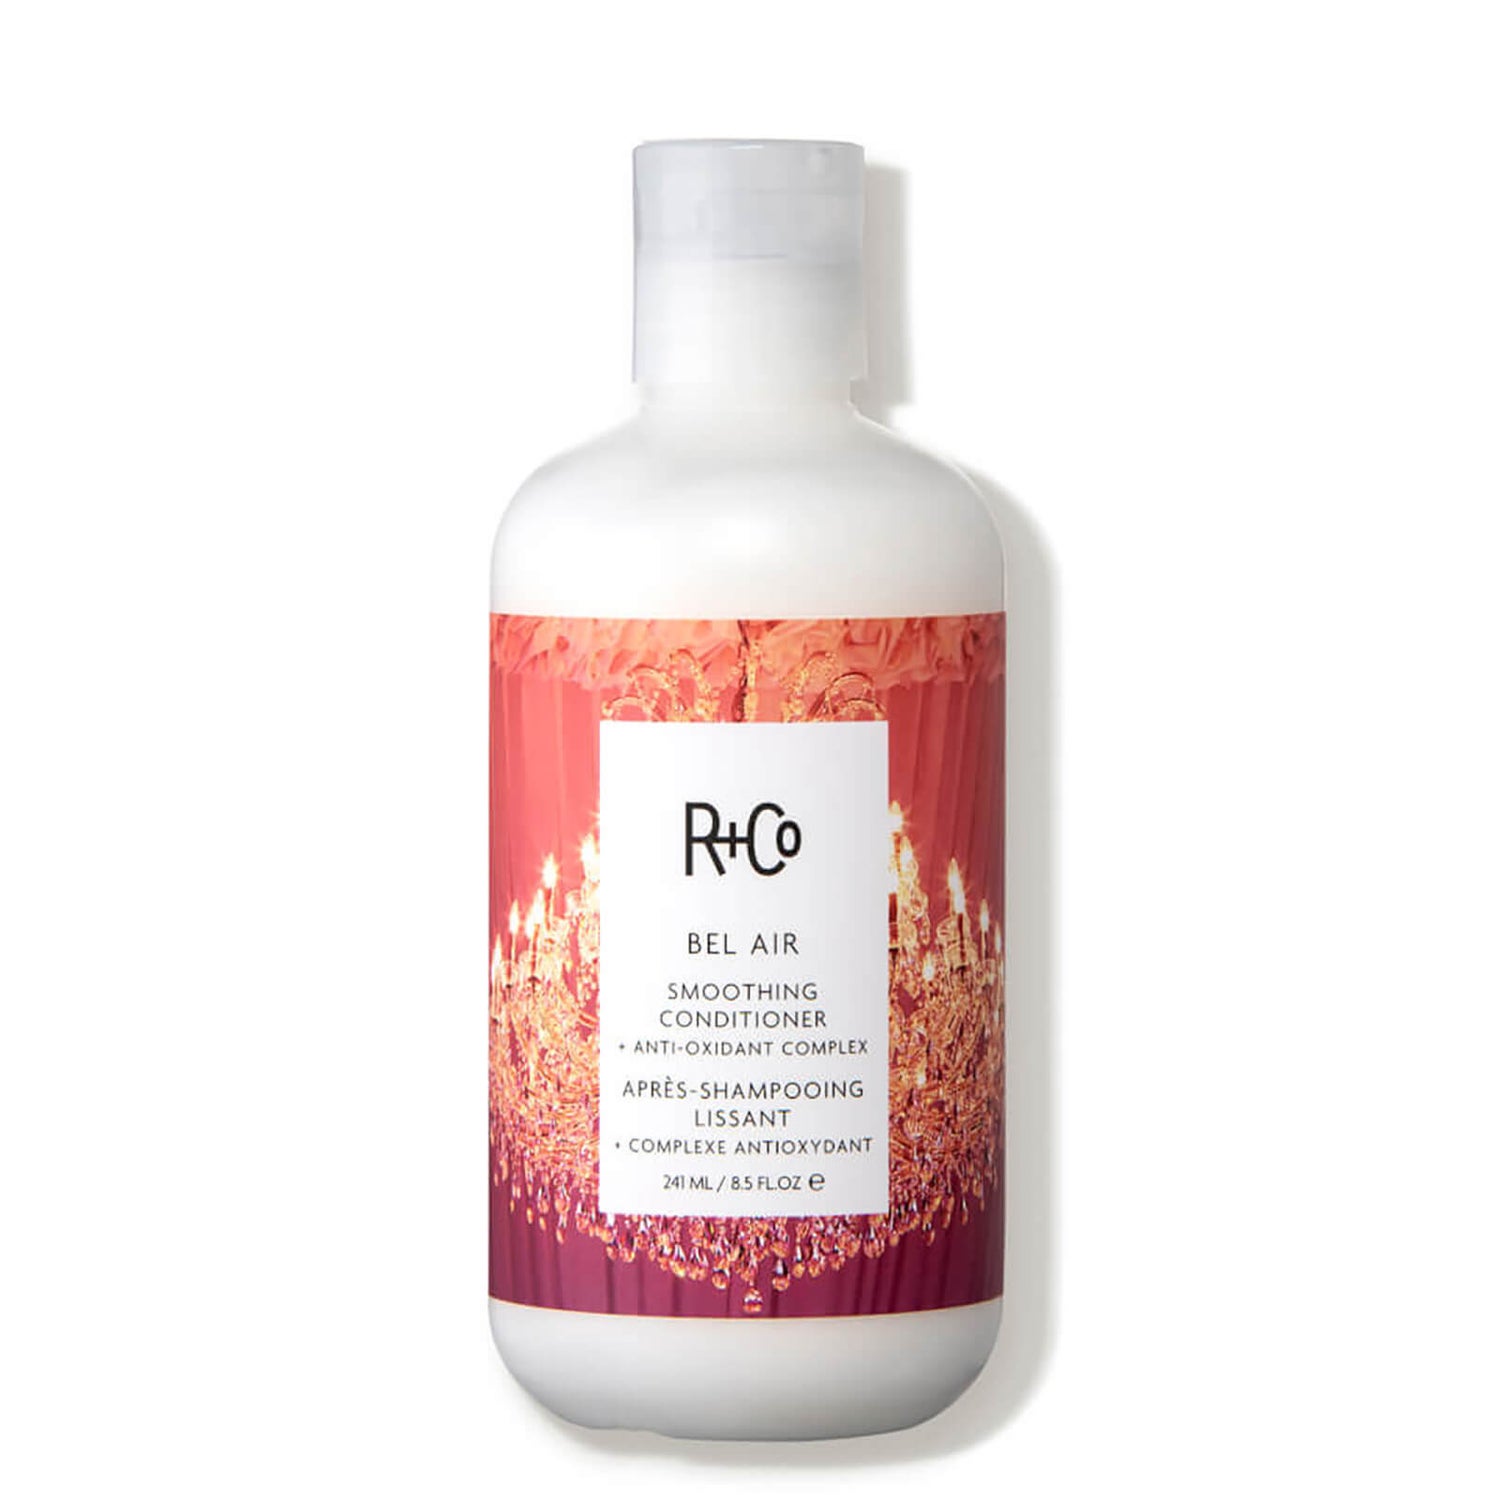 R+Co BEL AIR Smoothing Conditioner Anti-Oxidant Complex (8.5 fl. oz.)